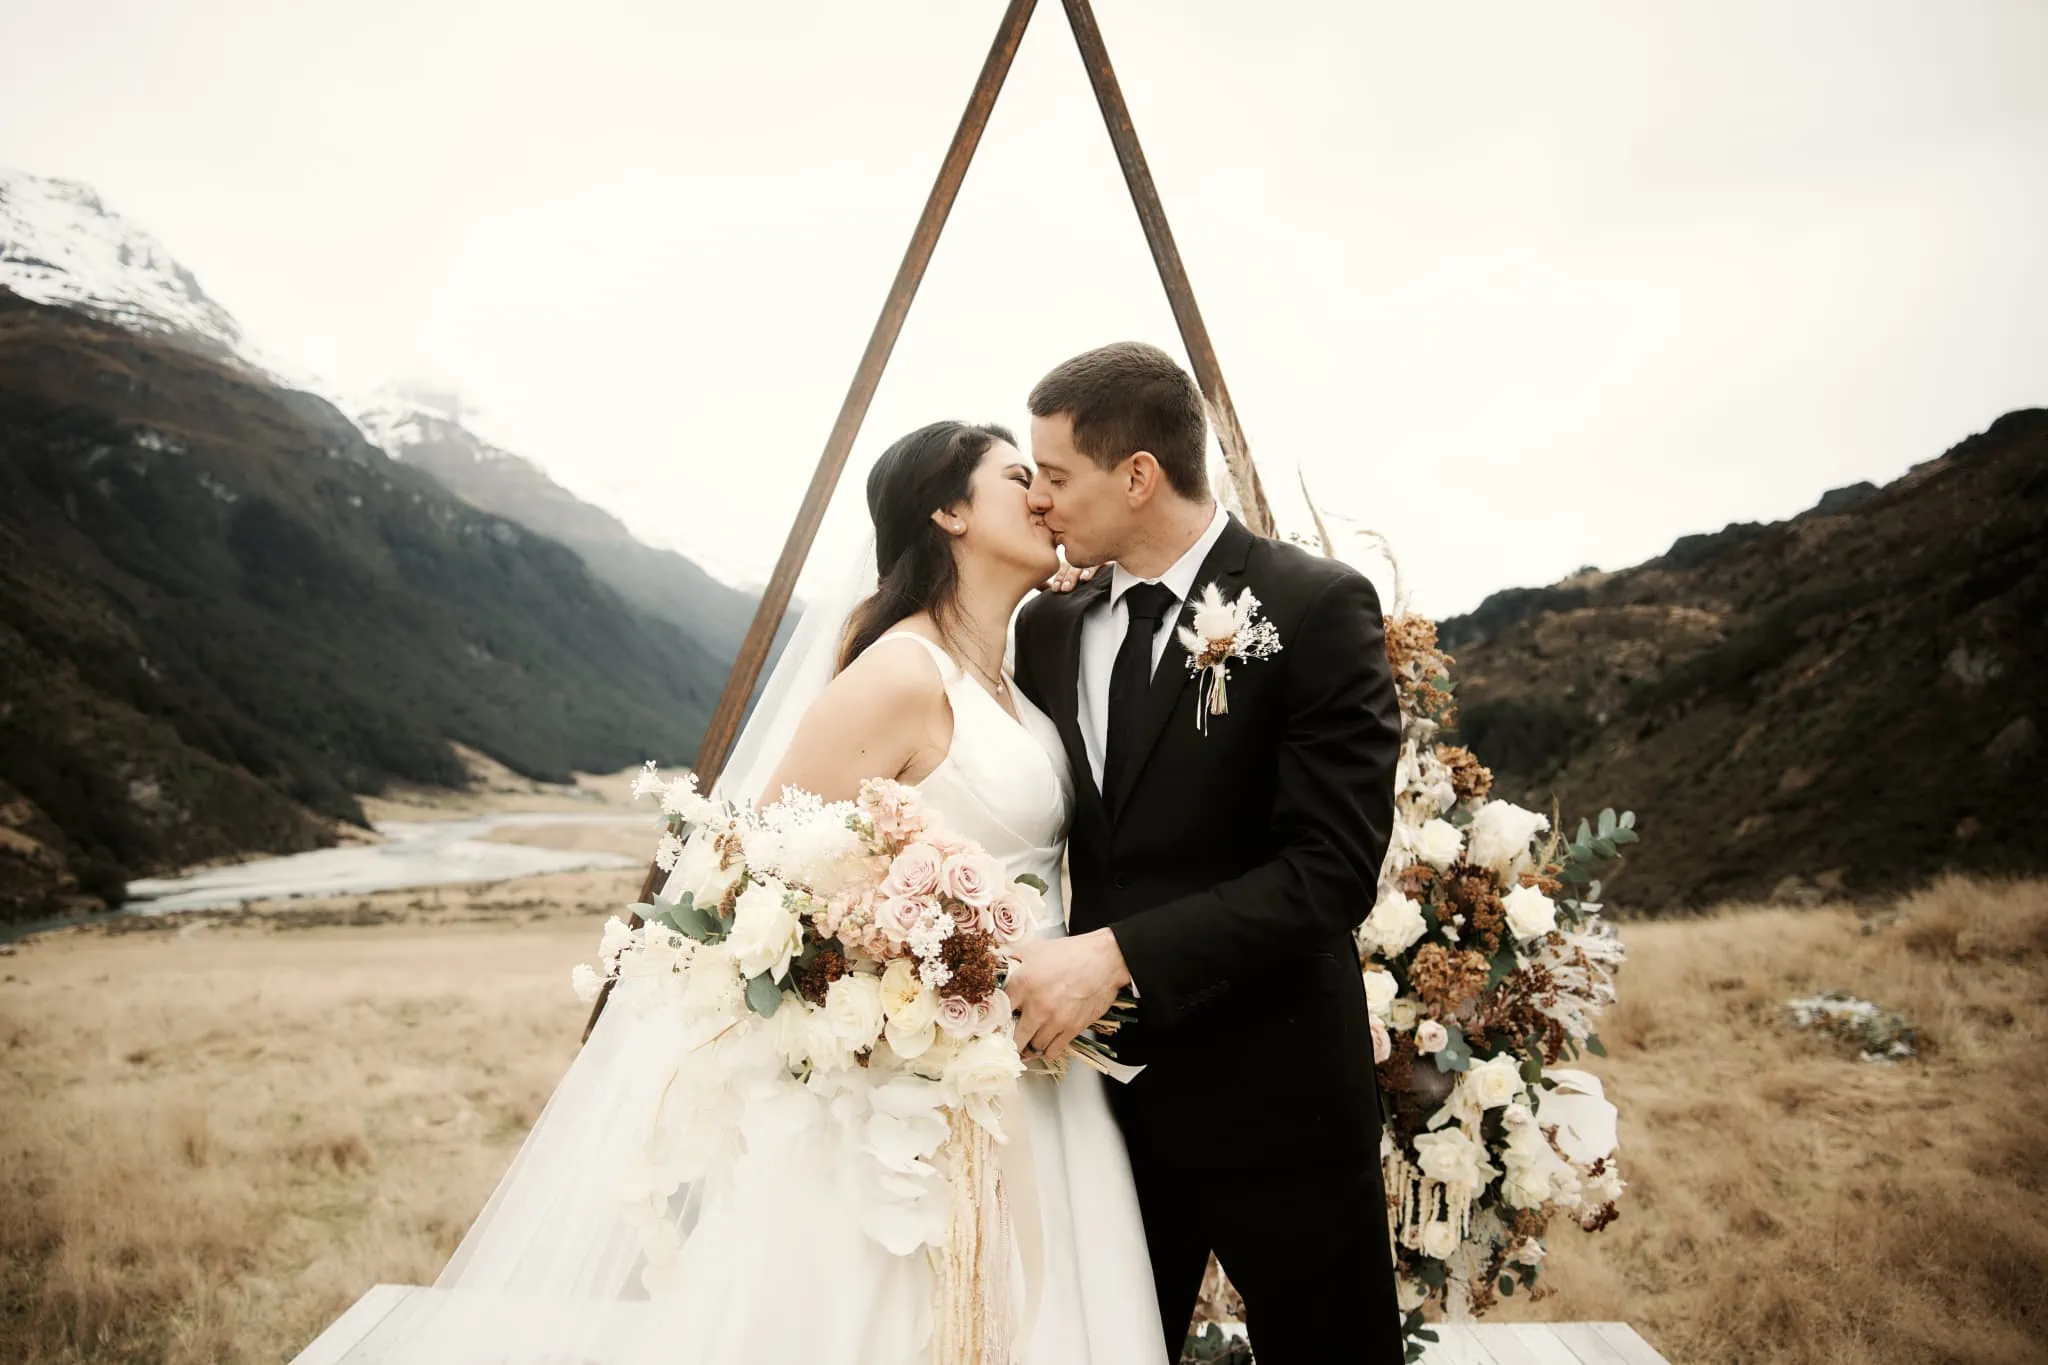 Michelle and Vedran share a romantic kiss under a wedding arch in the breathtaking Rees Valley Station for their elopement wedding.